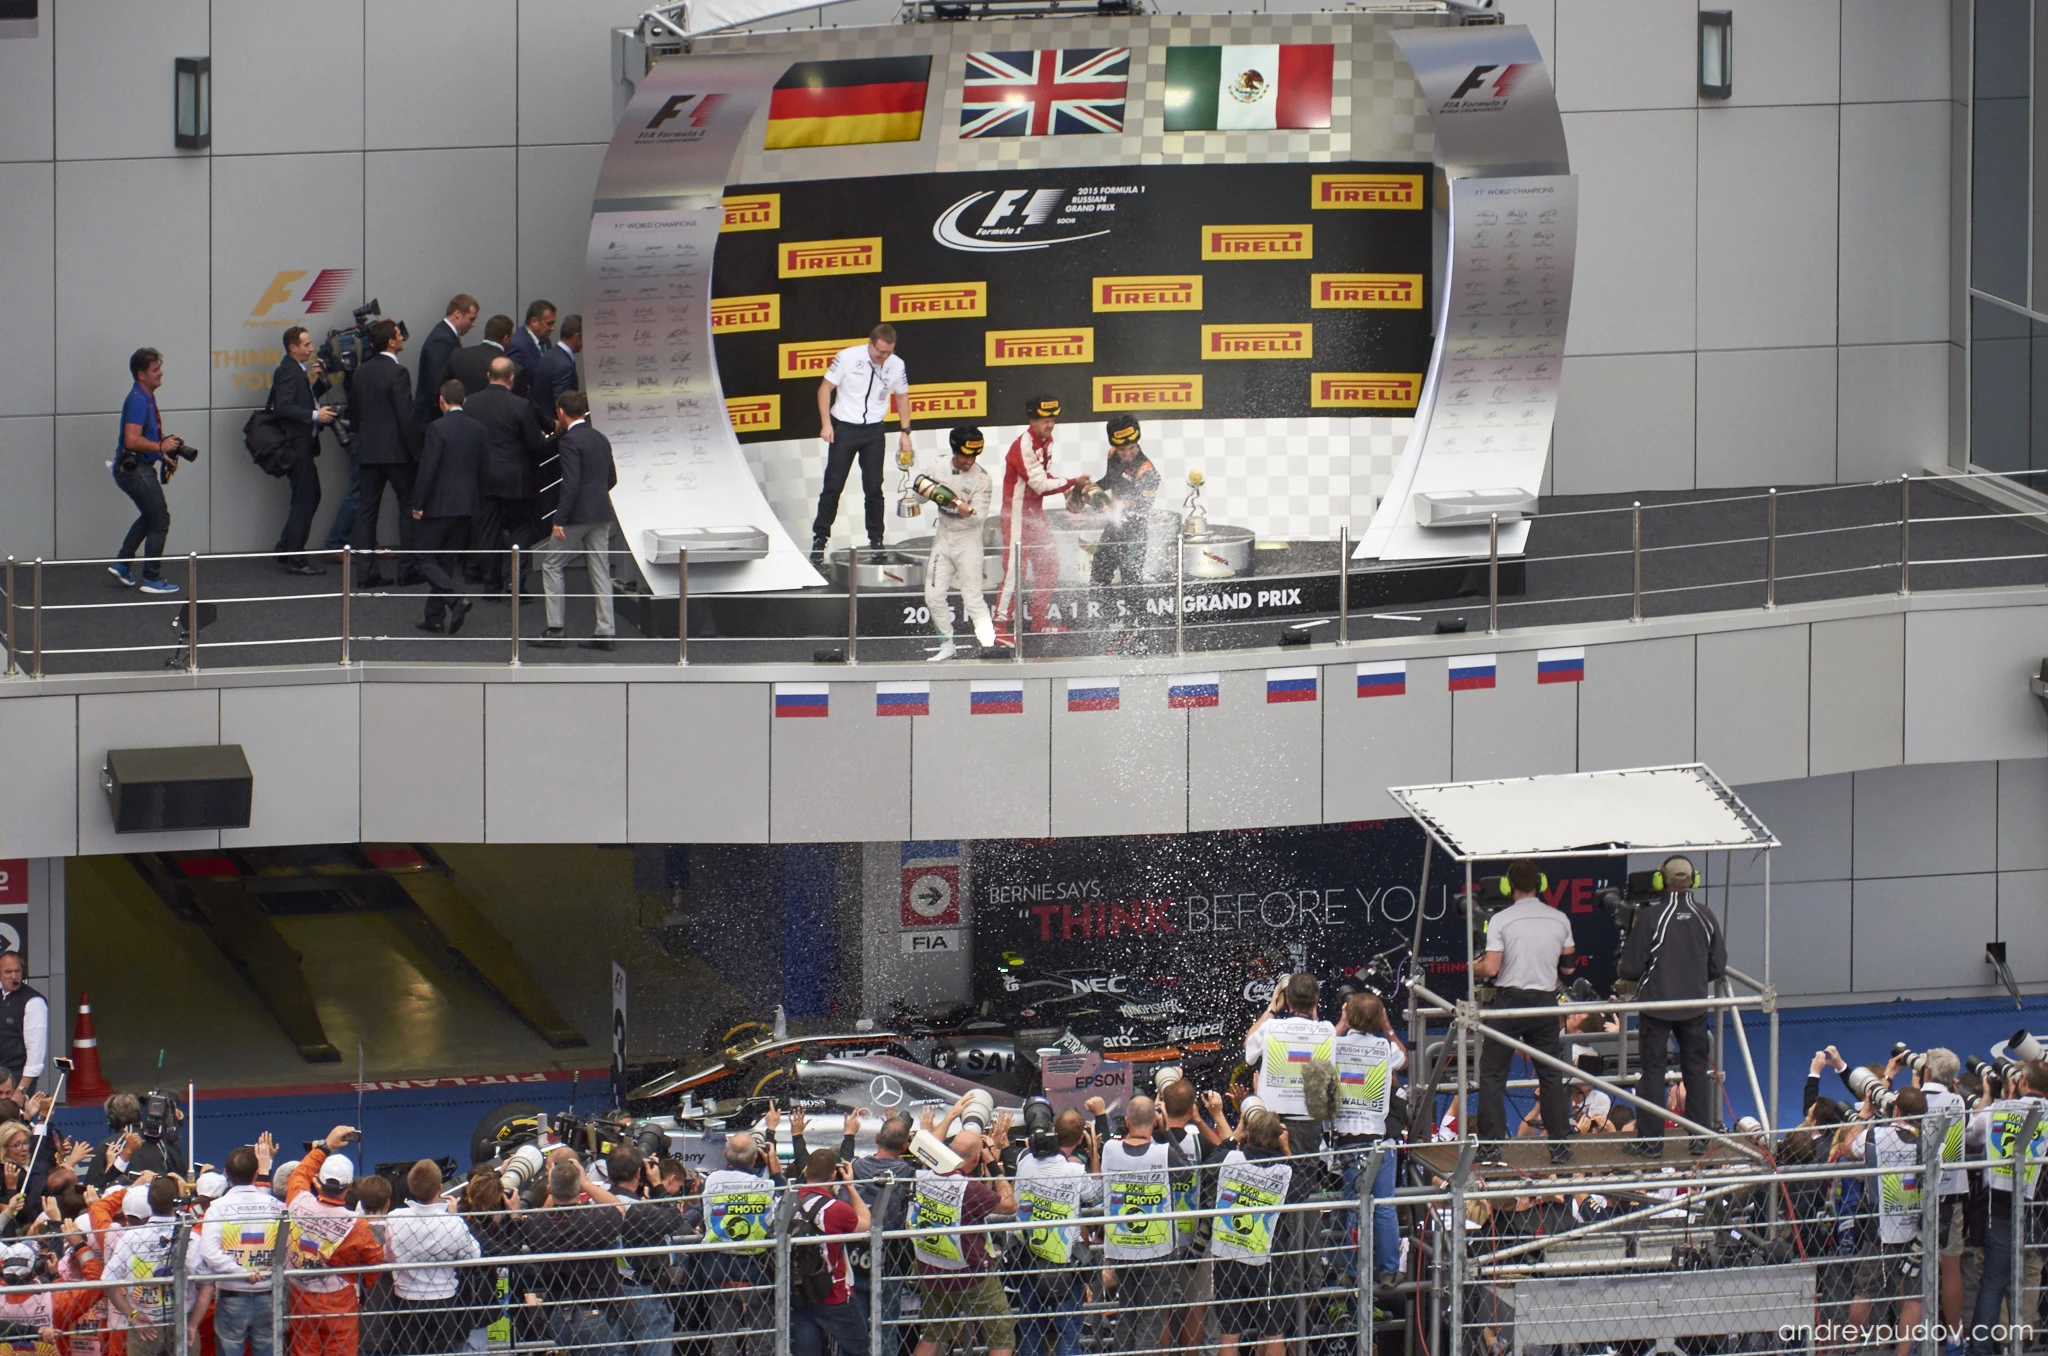 2015 Formula 1 Russian Grand Prix - Podium Ceremony

Lewis Hamilton won the race for the second season in a row, extending his Drivers' Championship lead to 66 points. With Nico Rosberg retiring early in the race, Sebastian Vettel reclaimed second place in the standings for the first time since his round two victory in Malaysia with a second-place finish. Sergio Pérez completed the podium in third for Force India.